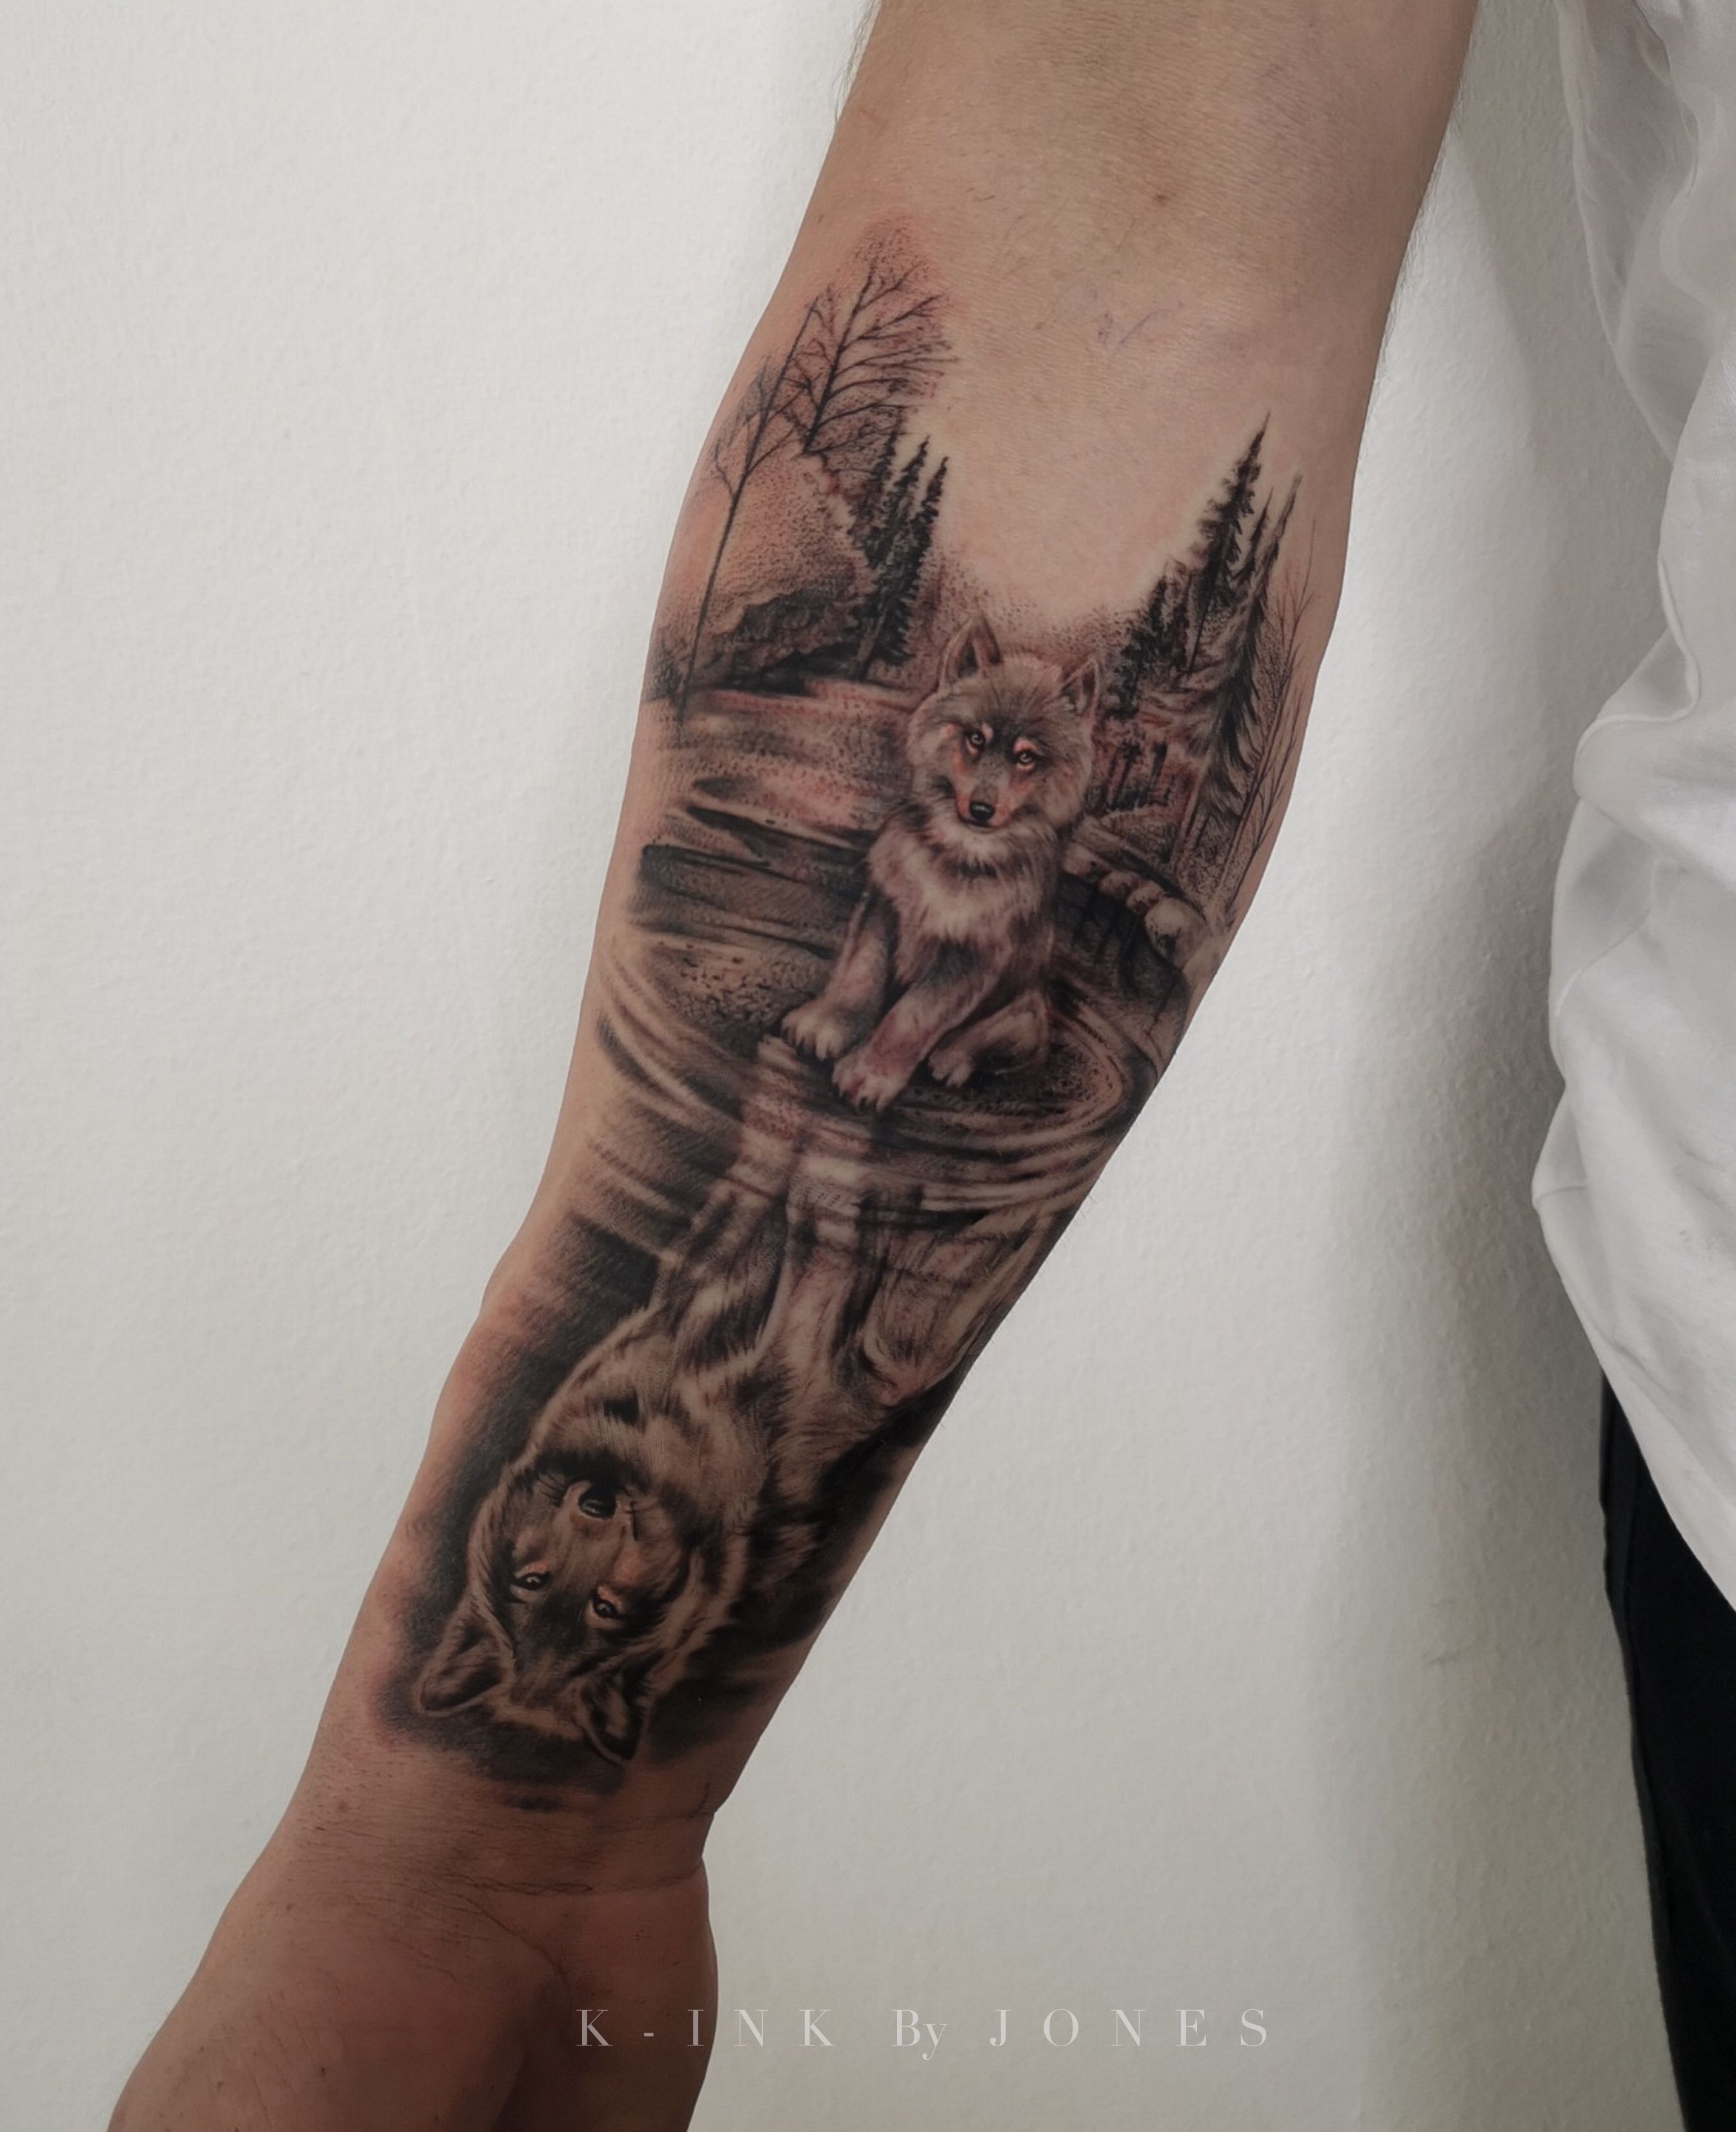 Find Cover-up tattoos in Kraków, Poland